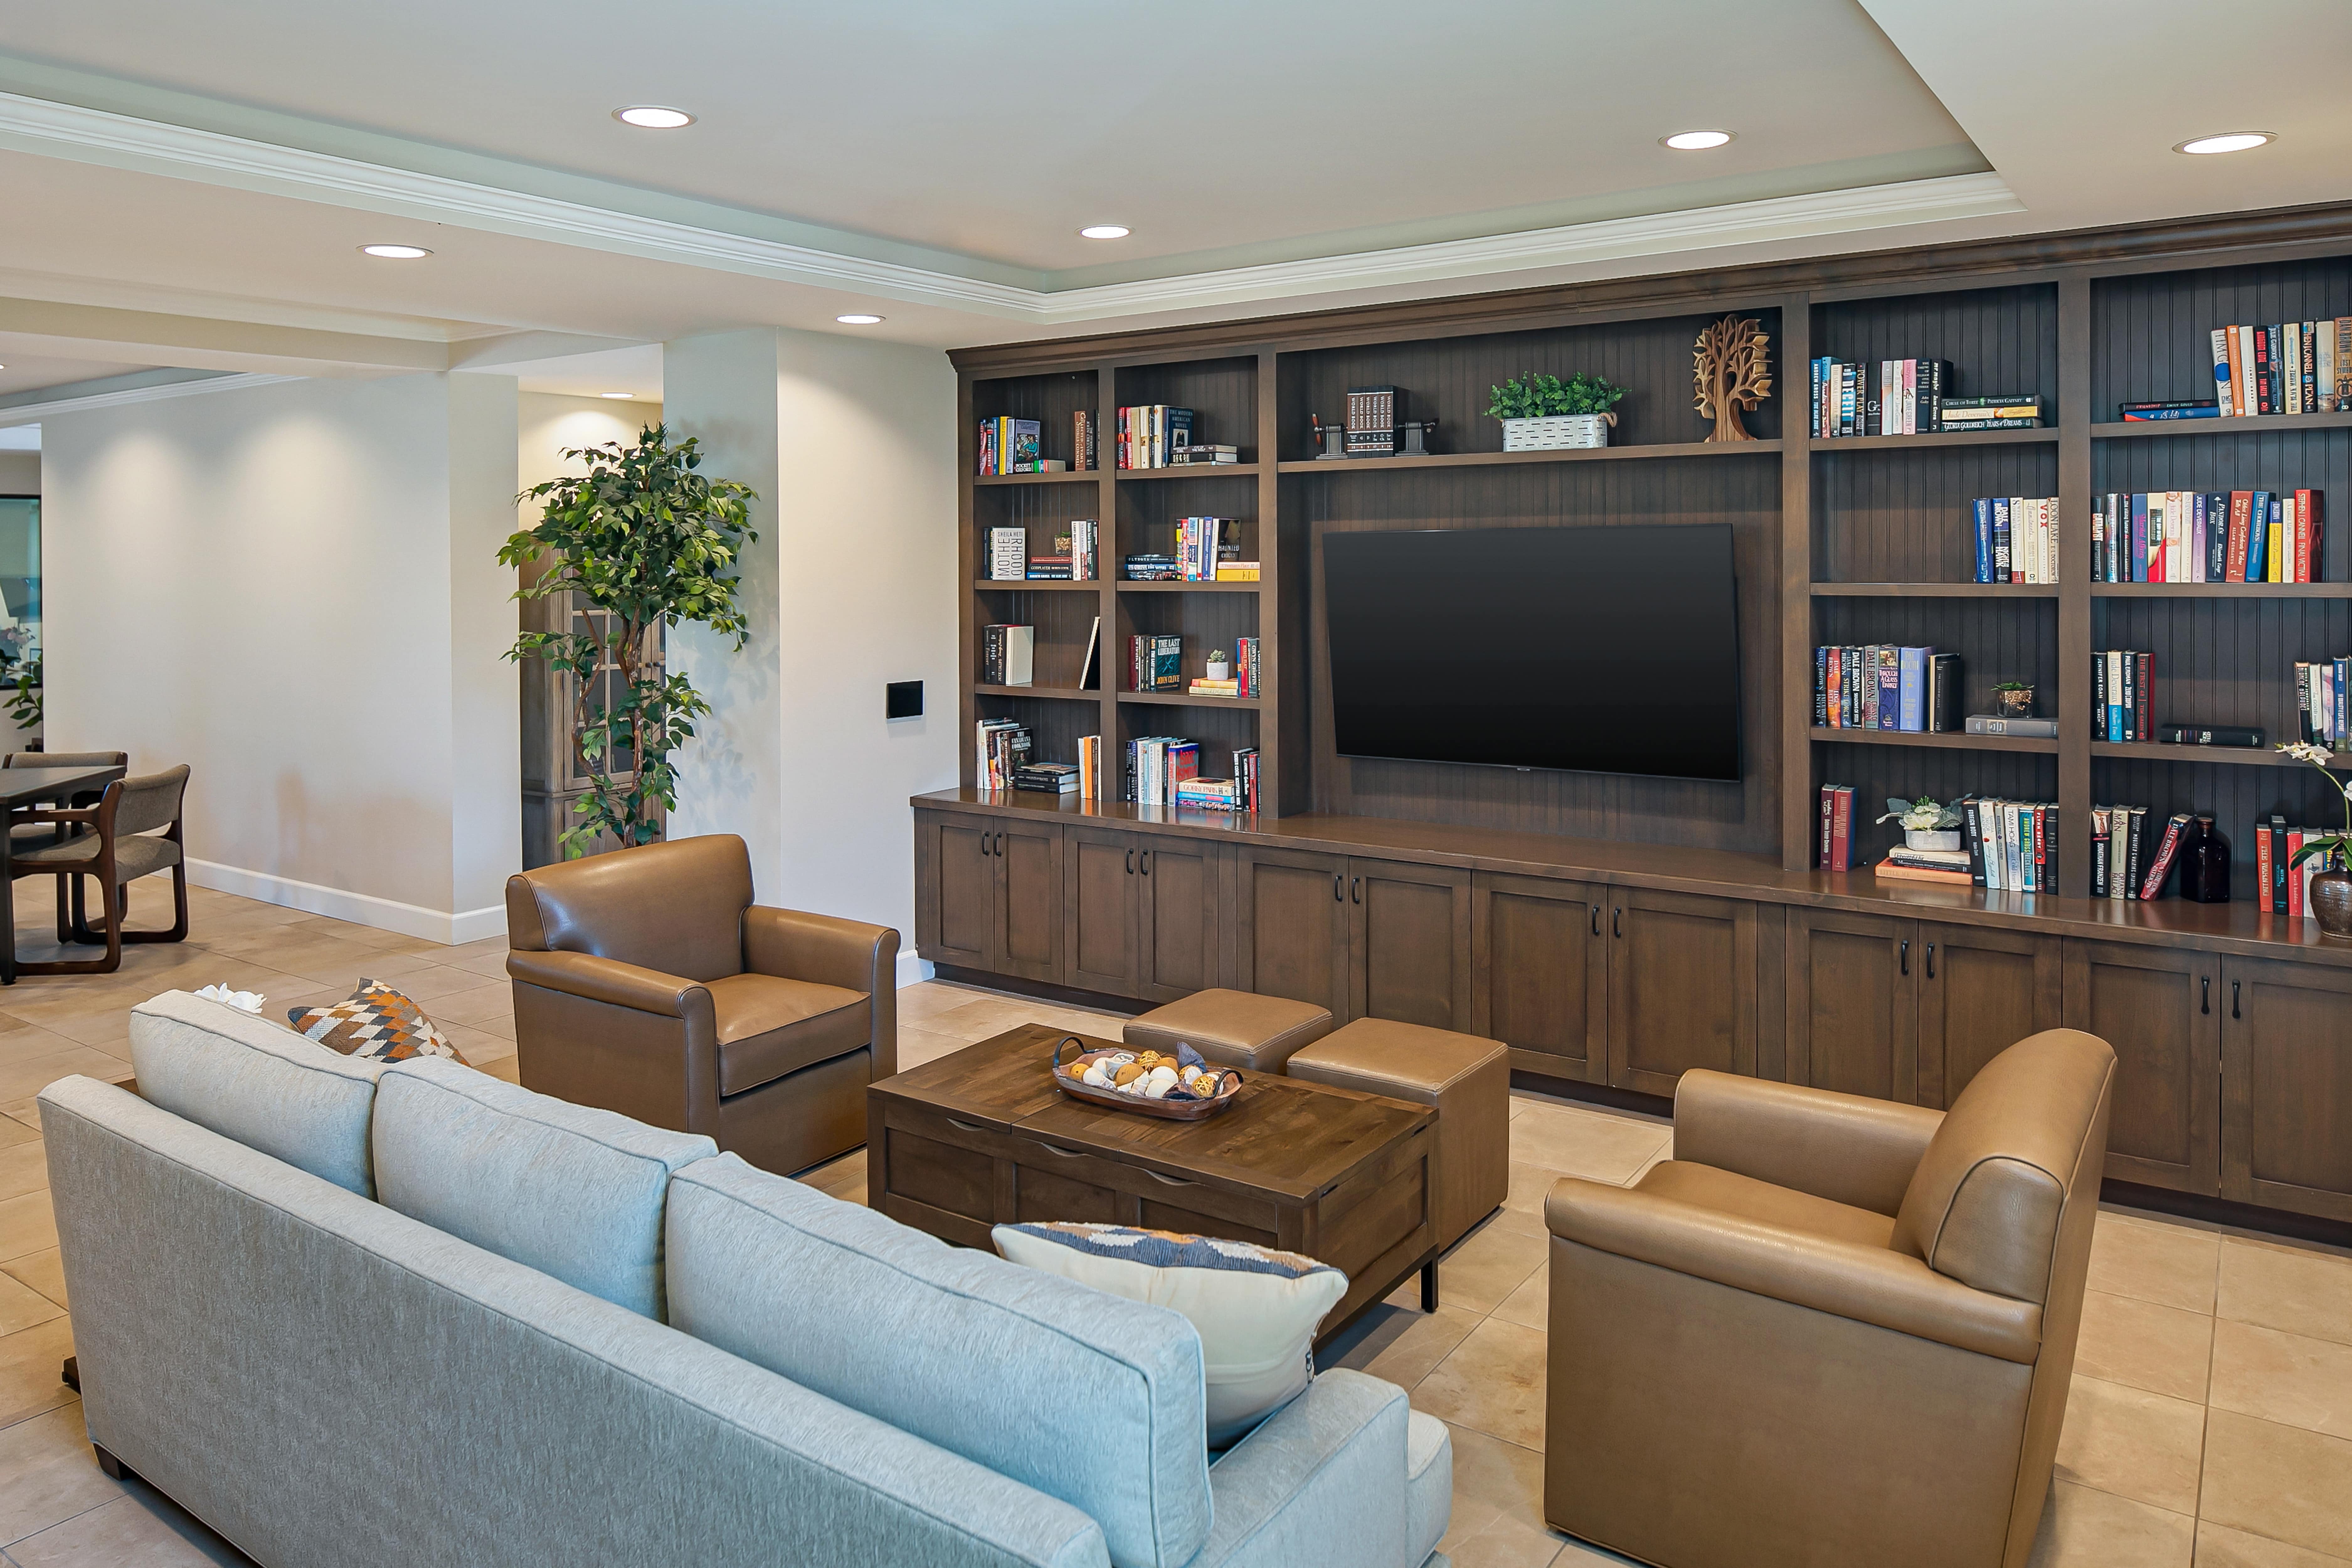 Large flat screen TV in entertainment center with couch and two leather armchairs